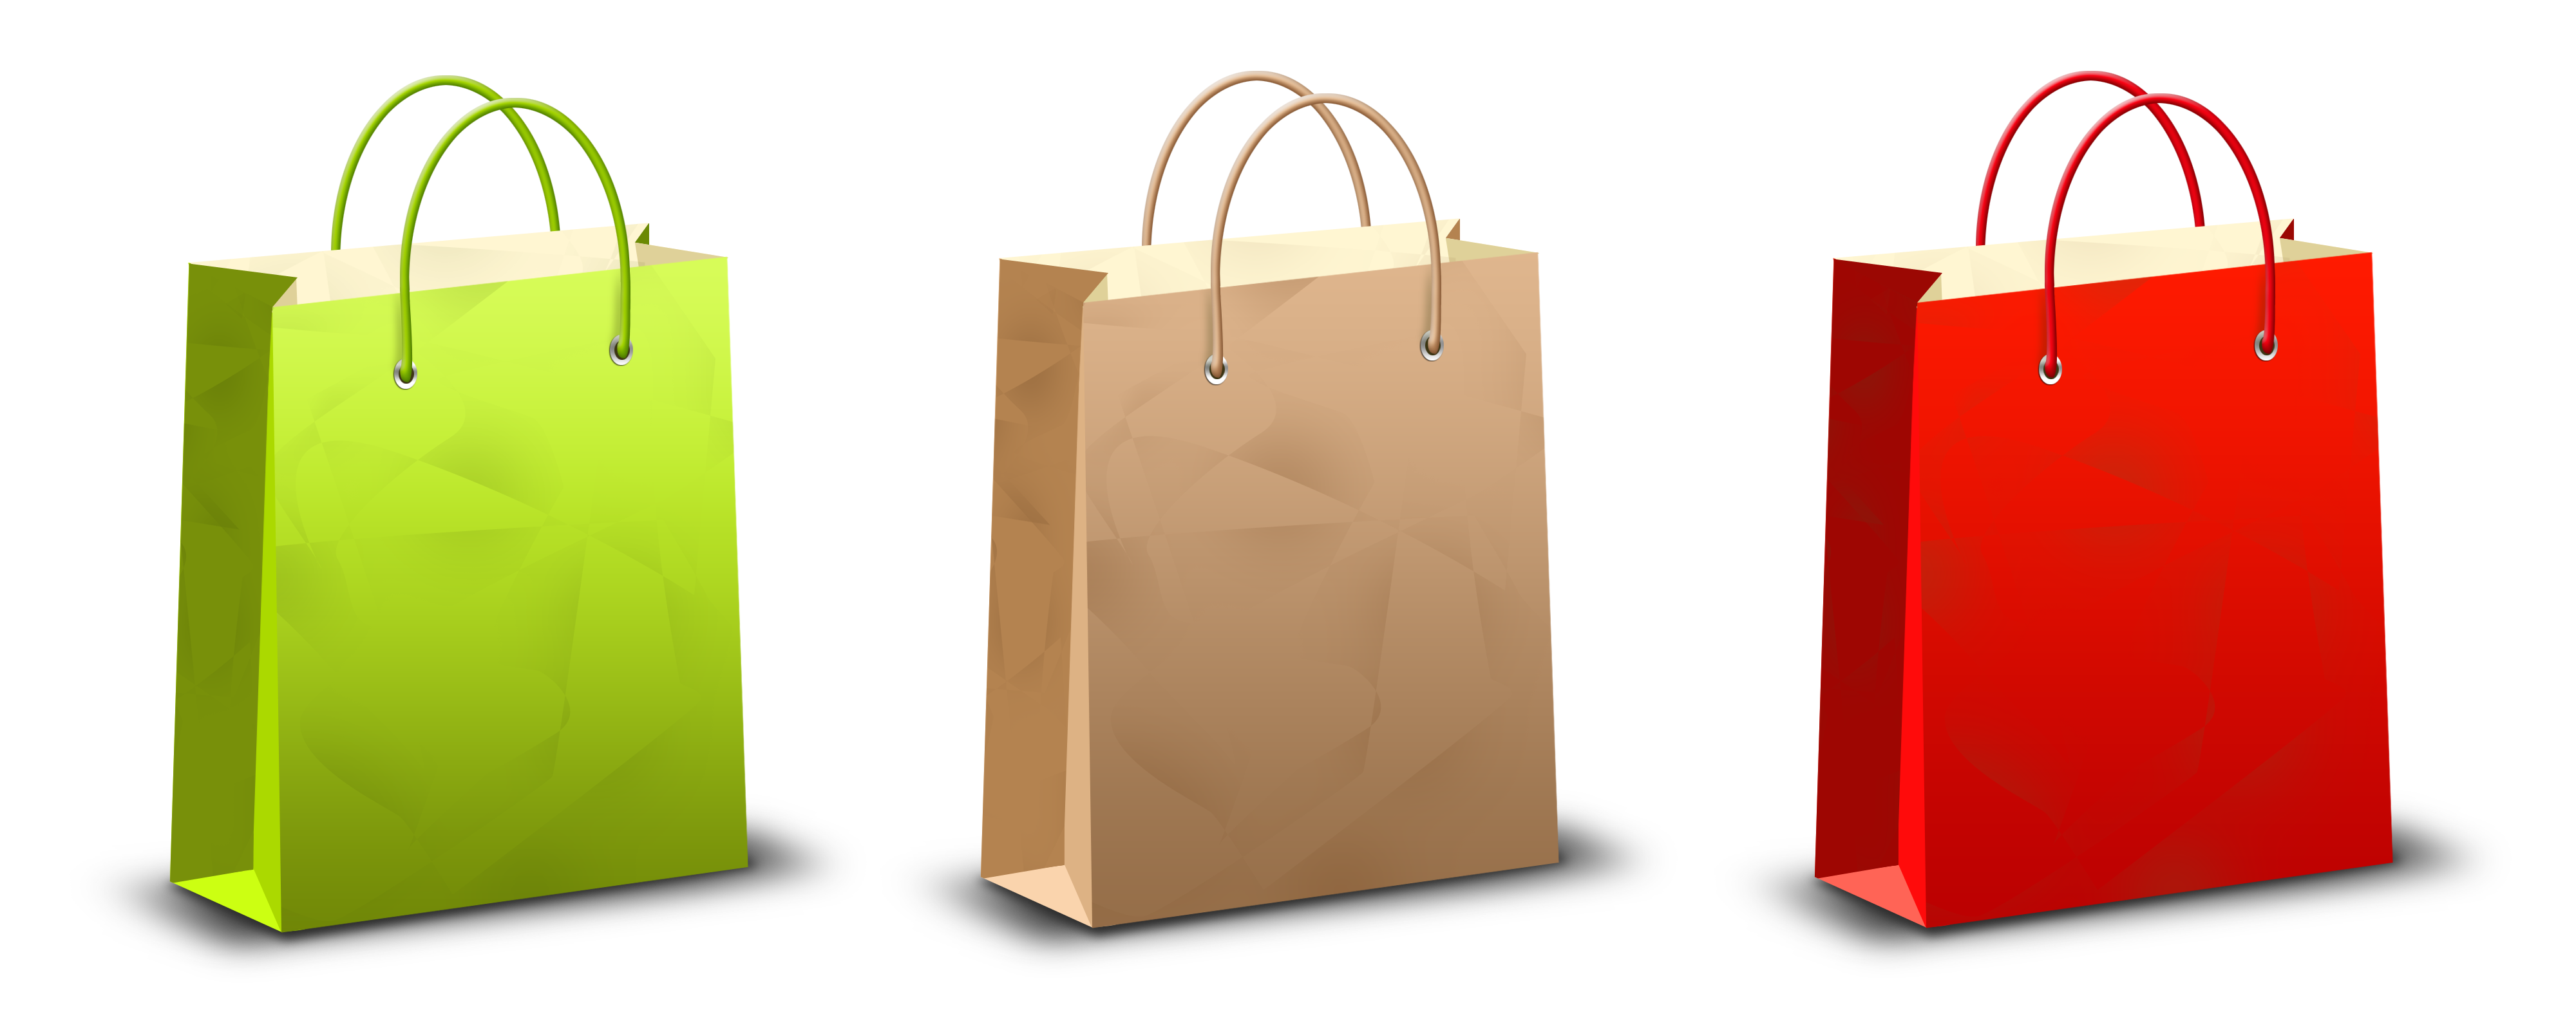 Bags png #33951 - Free Icons and PNG Backgrounds